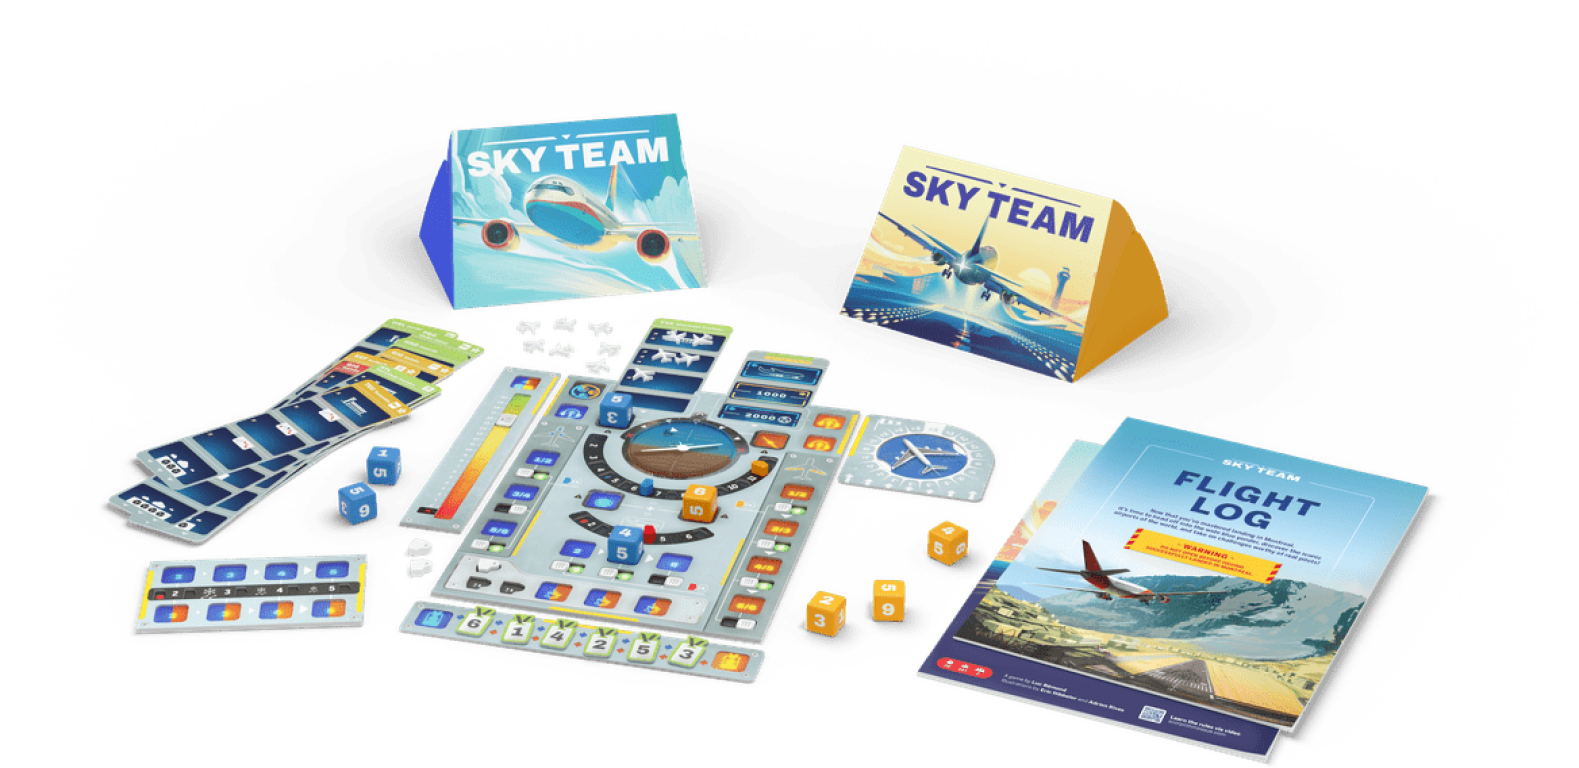 Sky Team components